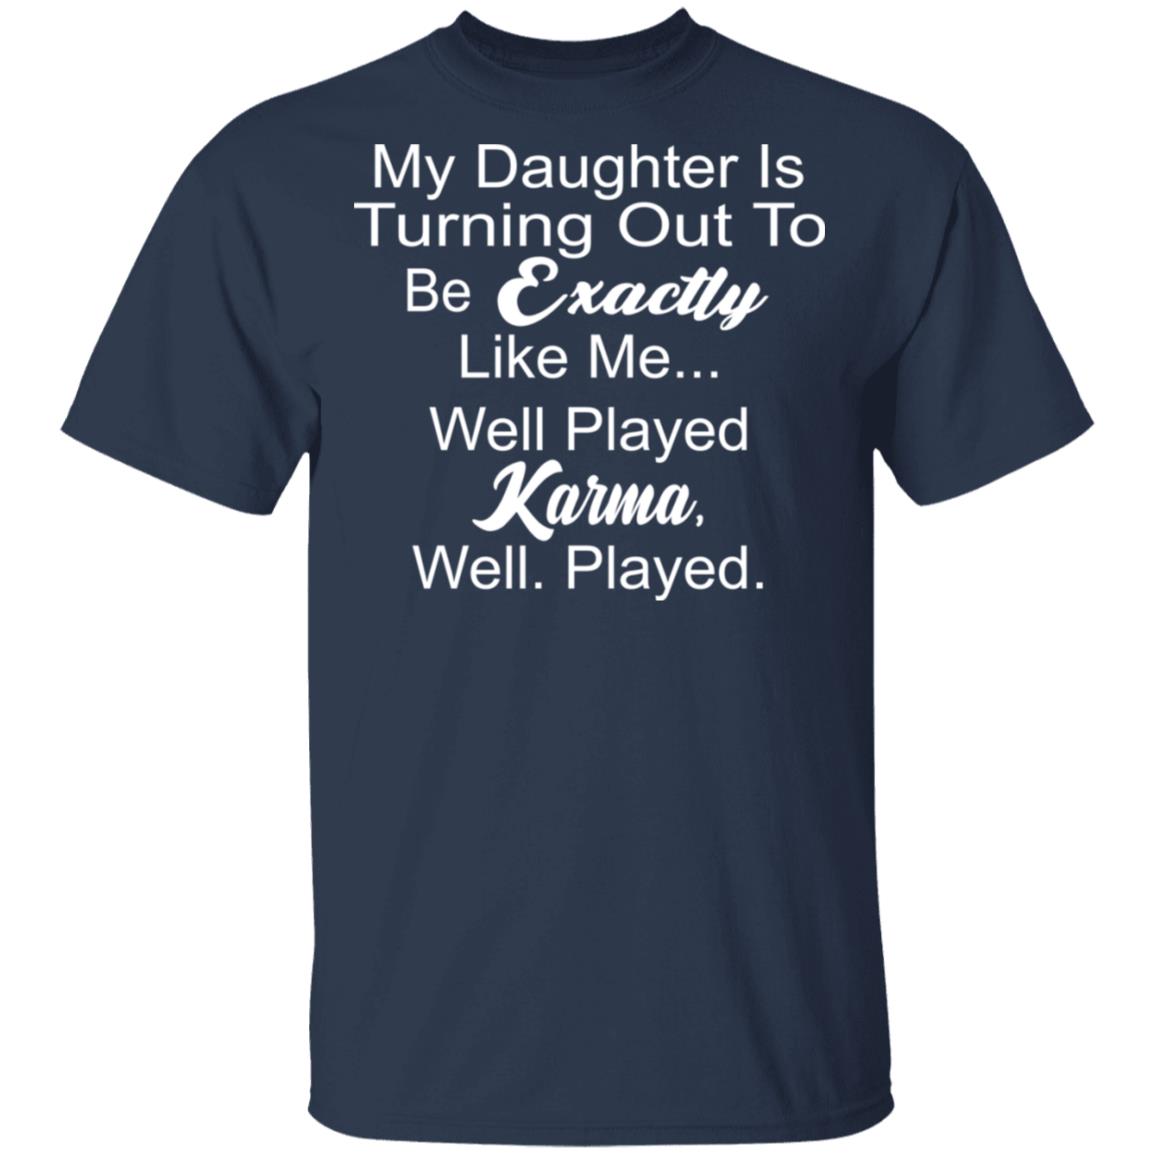 My Daughter Is Turning Out To Be Exactly Like Me Shirt - Allbluetees ...